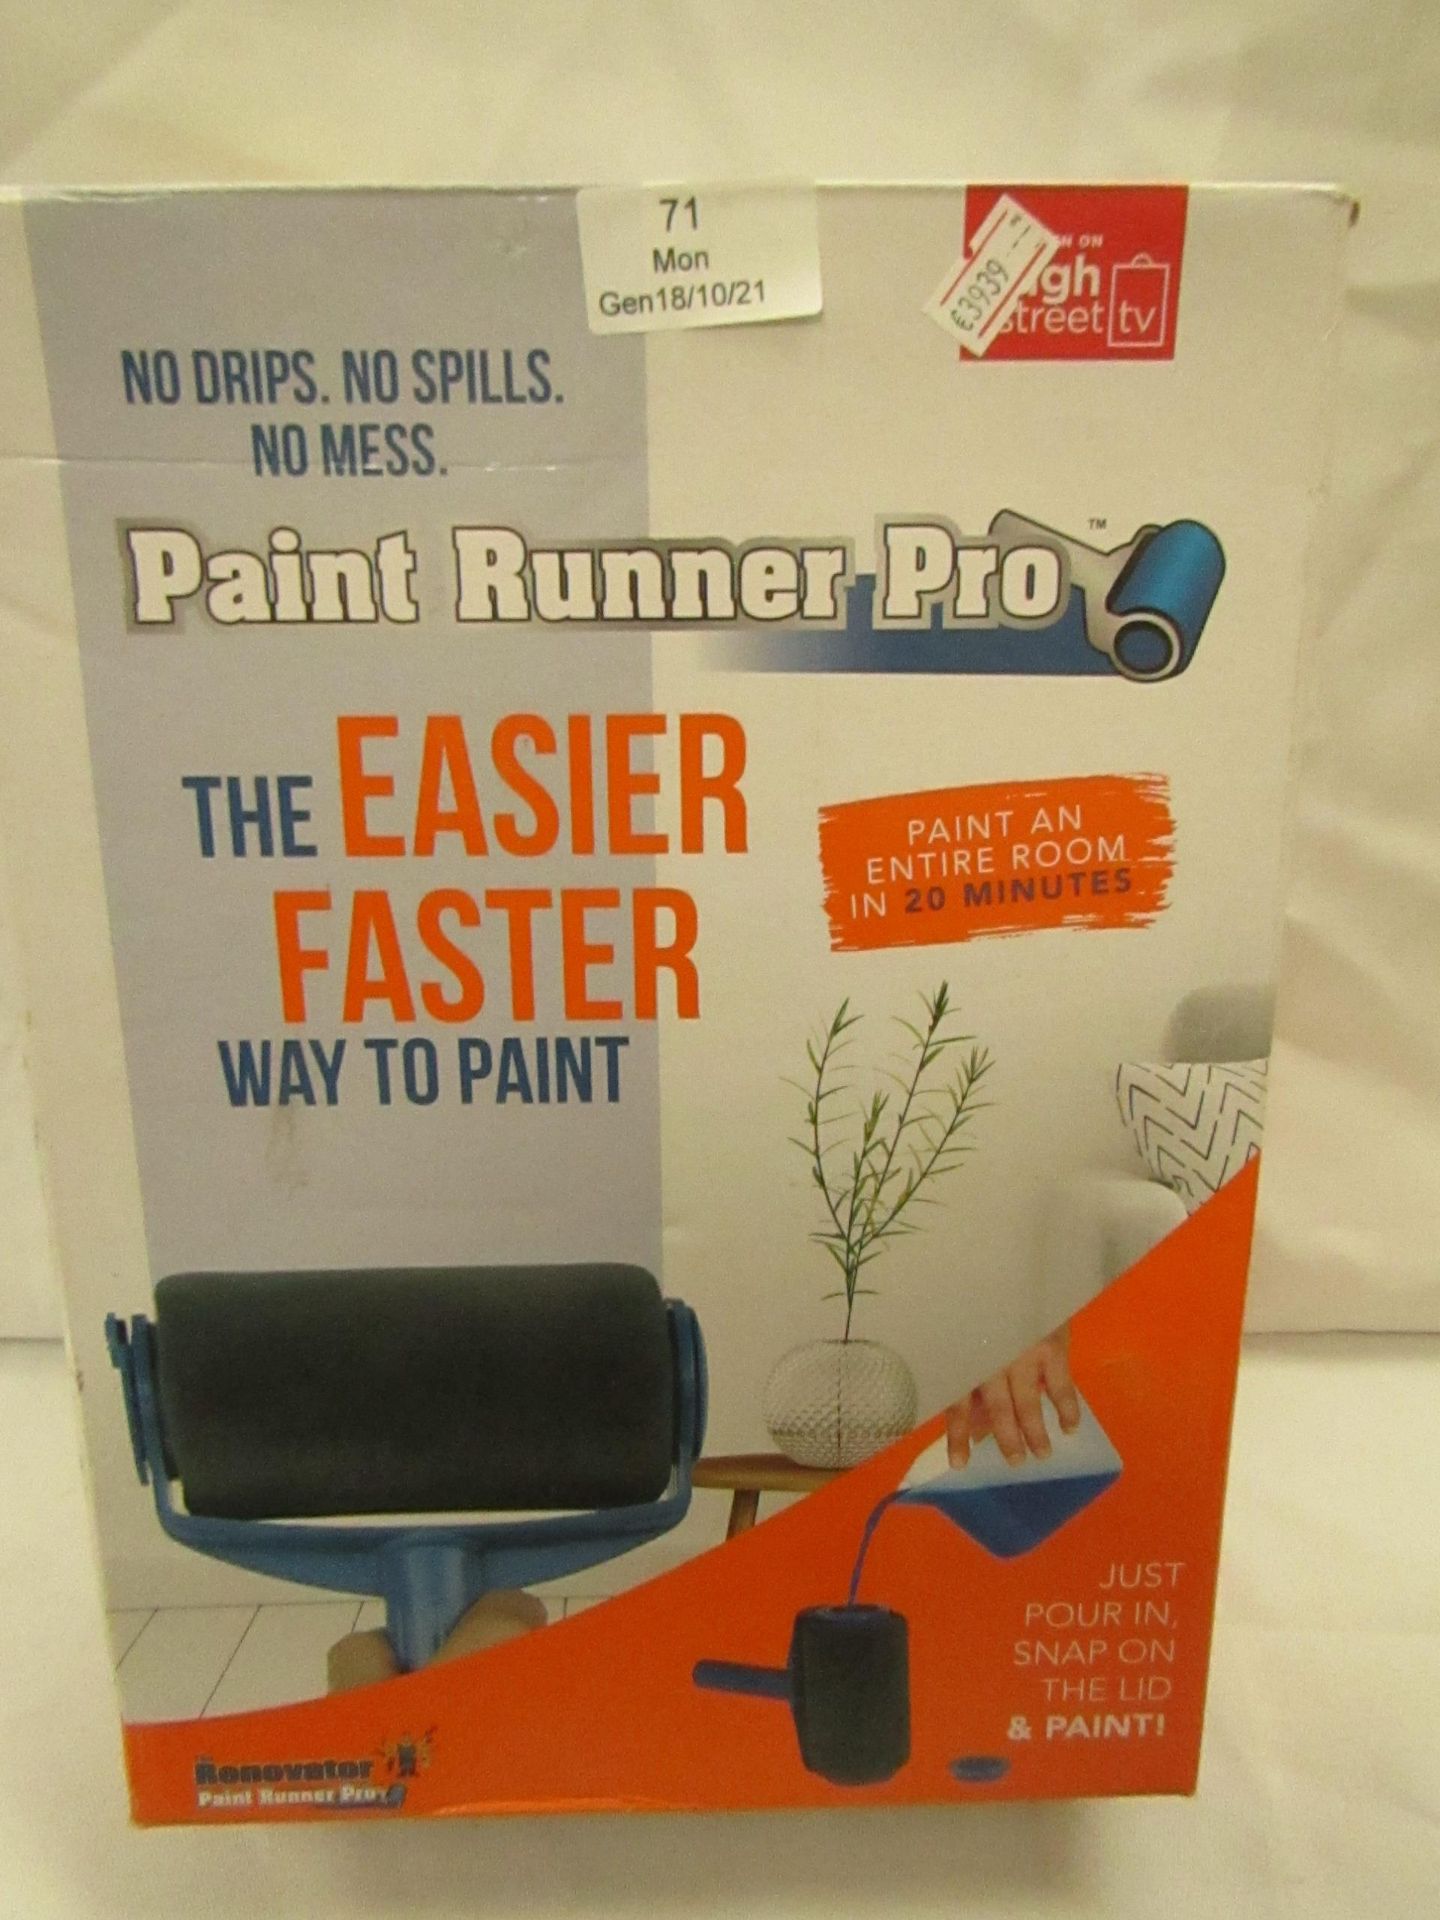 Paint Runner Pro - Painting Brush Kit - Unchecked & Boxed.